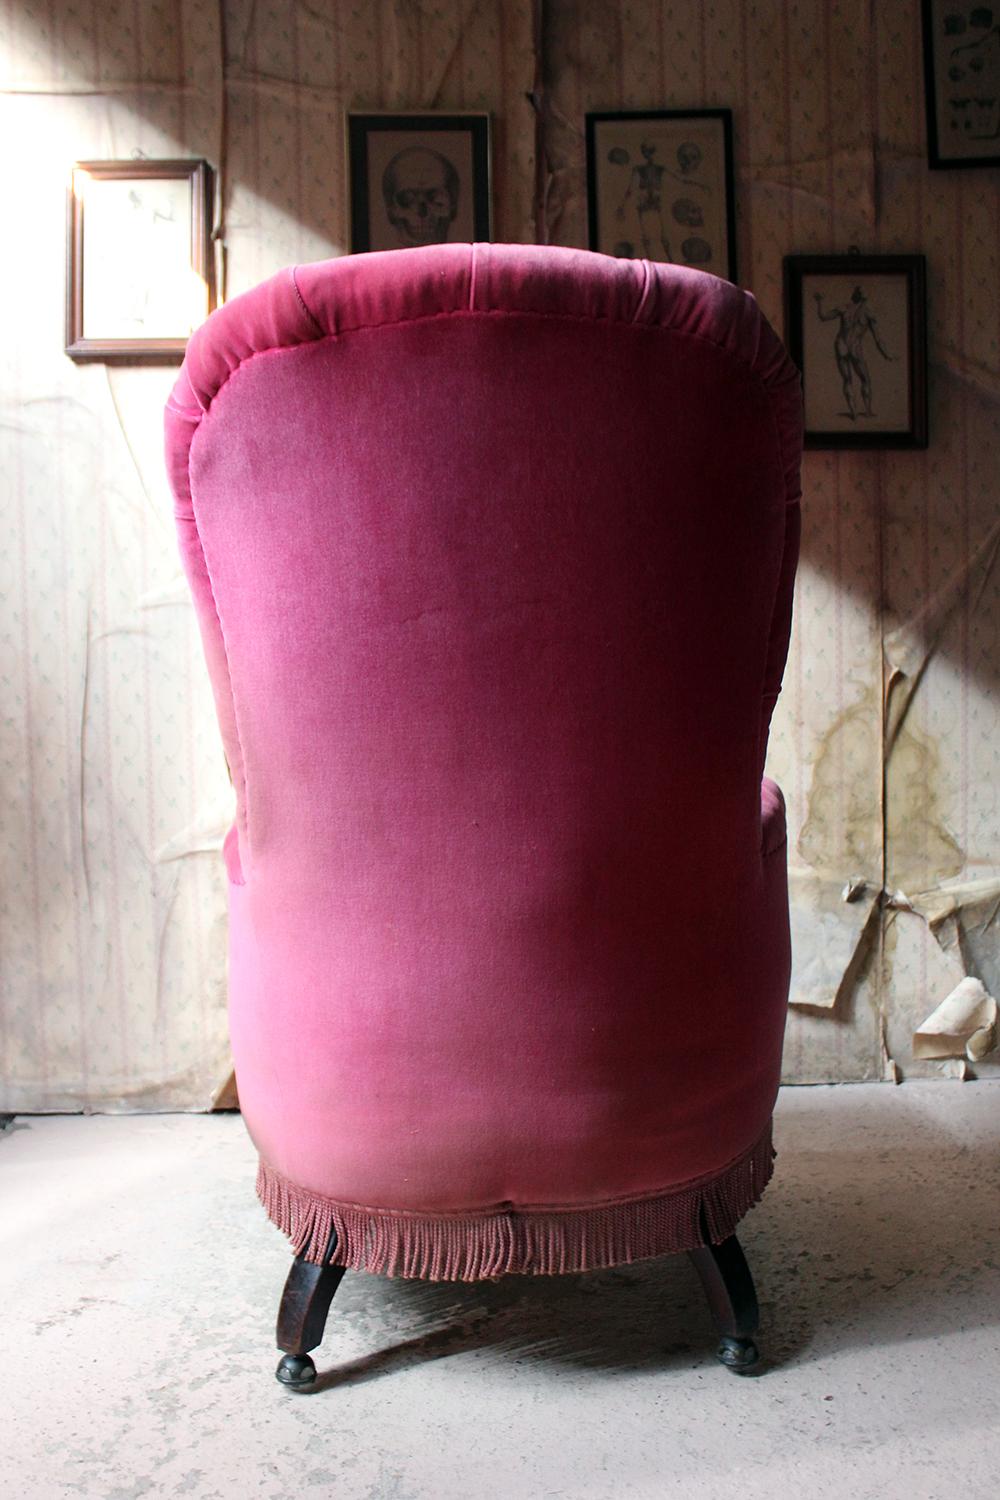 Unusual 19th Century French Pink Upholstered Spoon Back Armchair, circa 1870 8